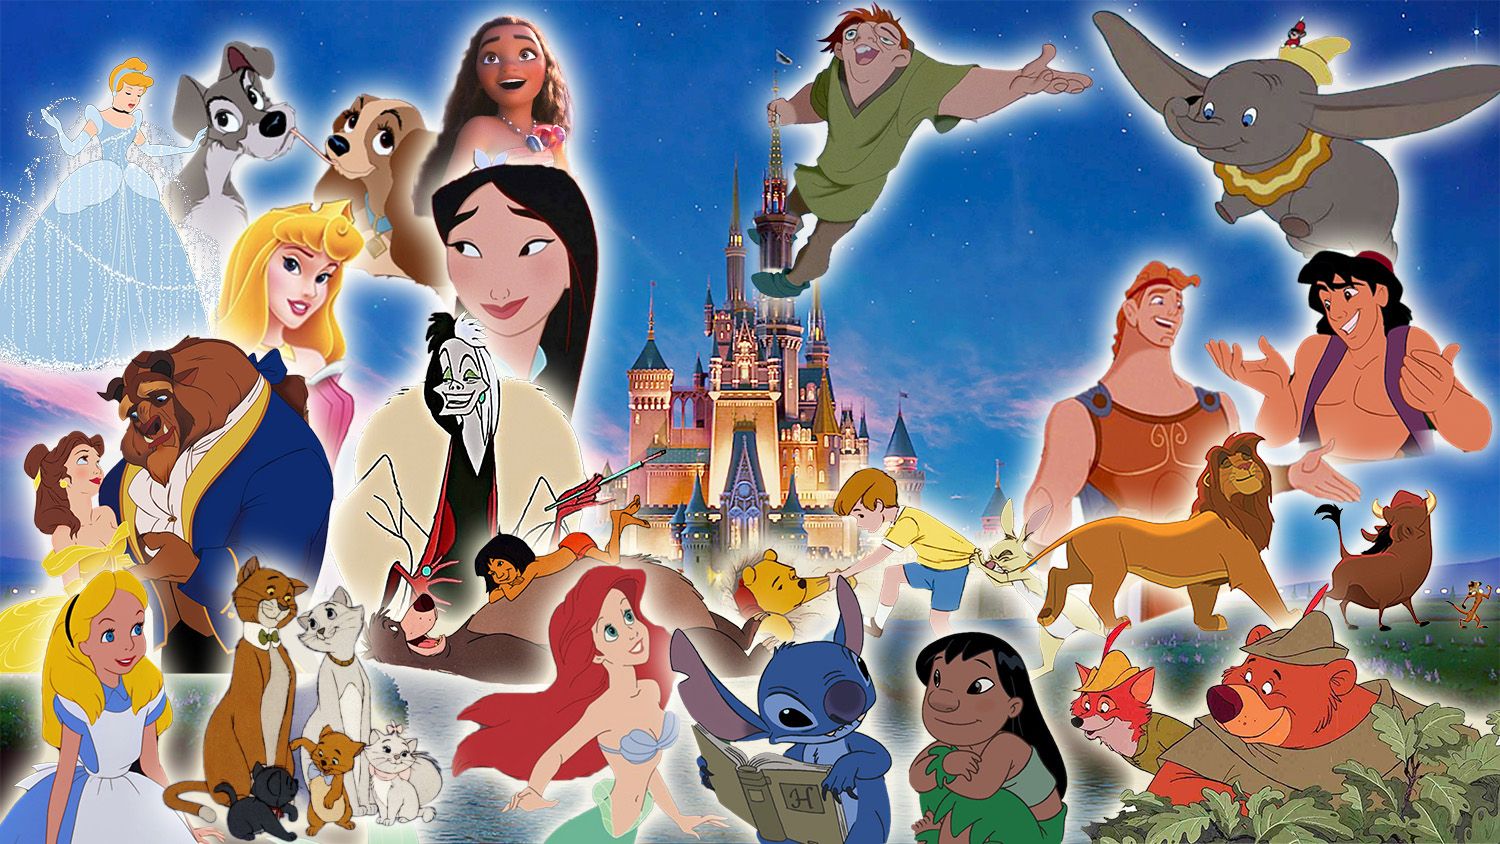 Disney's live-action remakes: Which Disney movie are they remaking next?